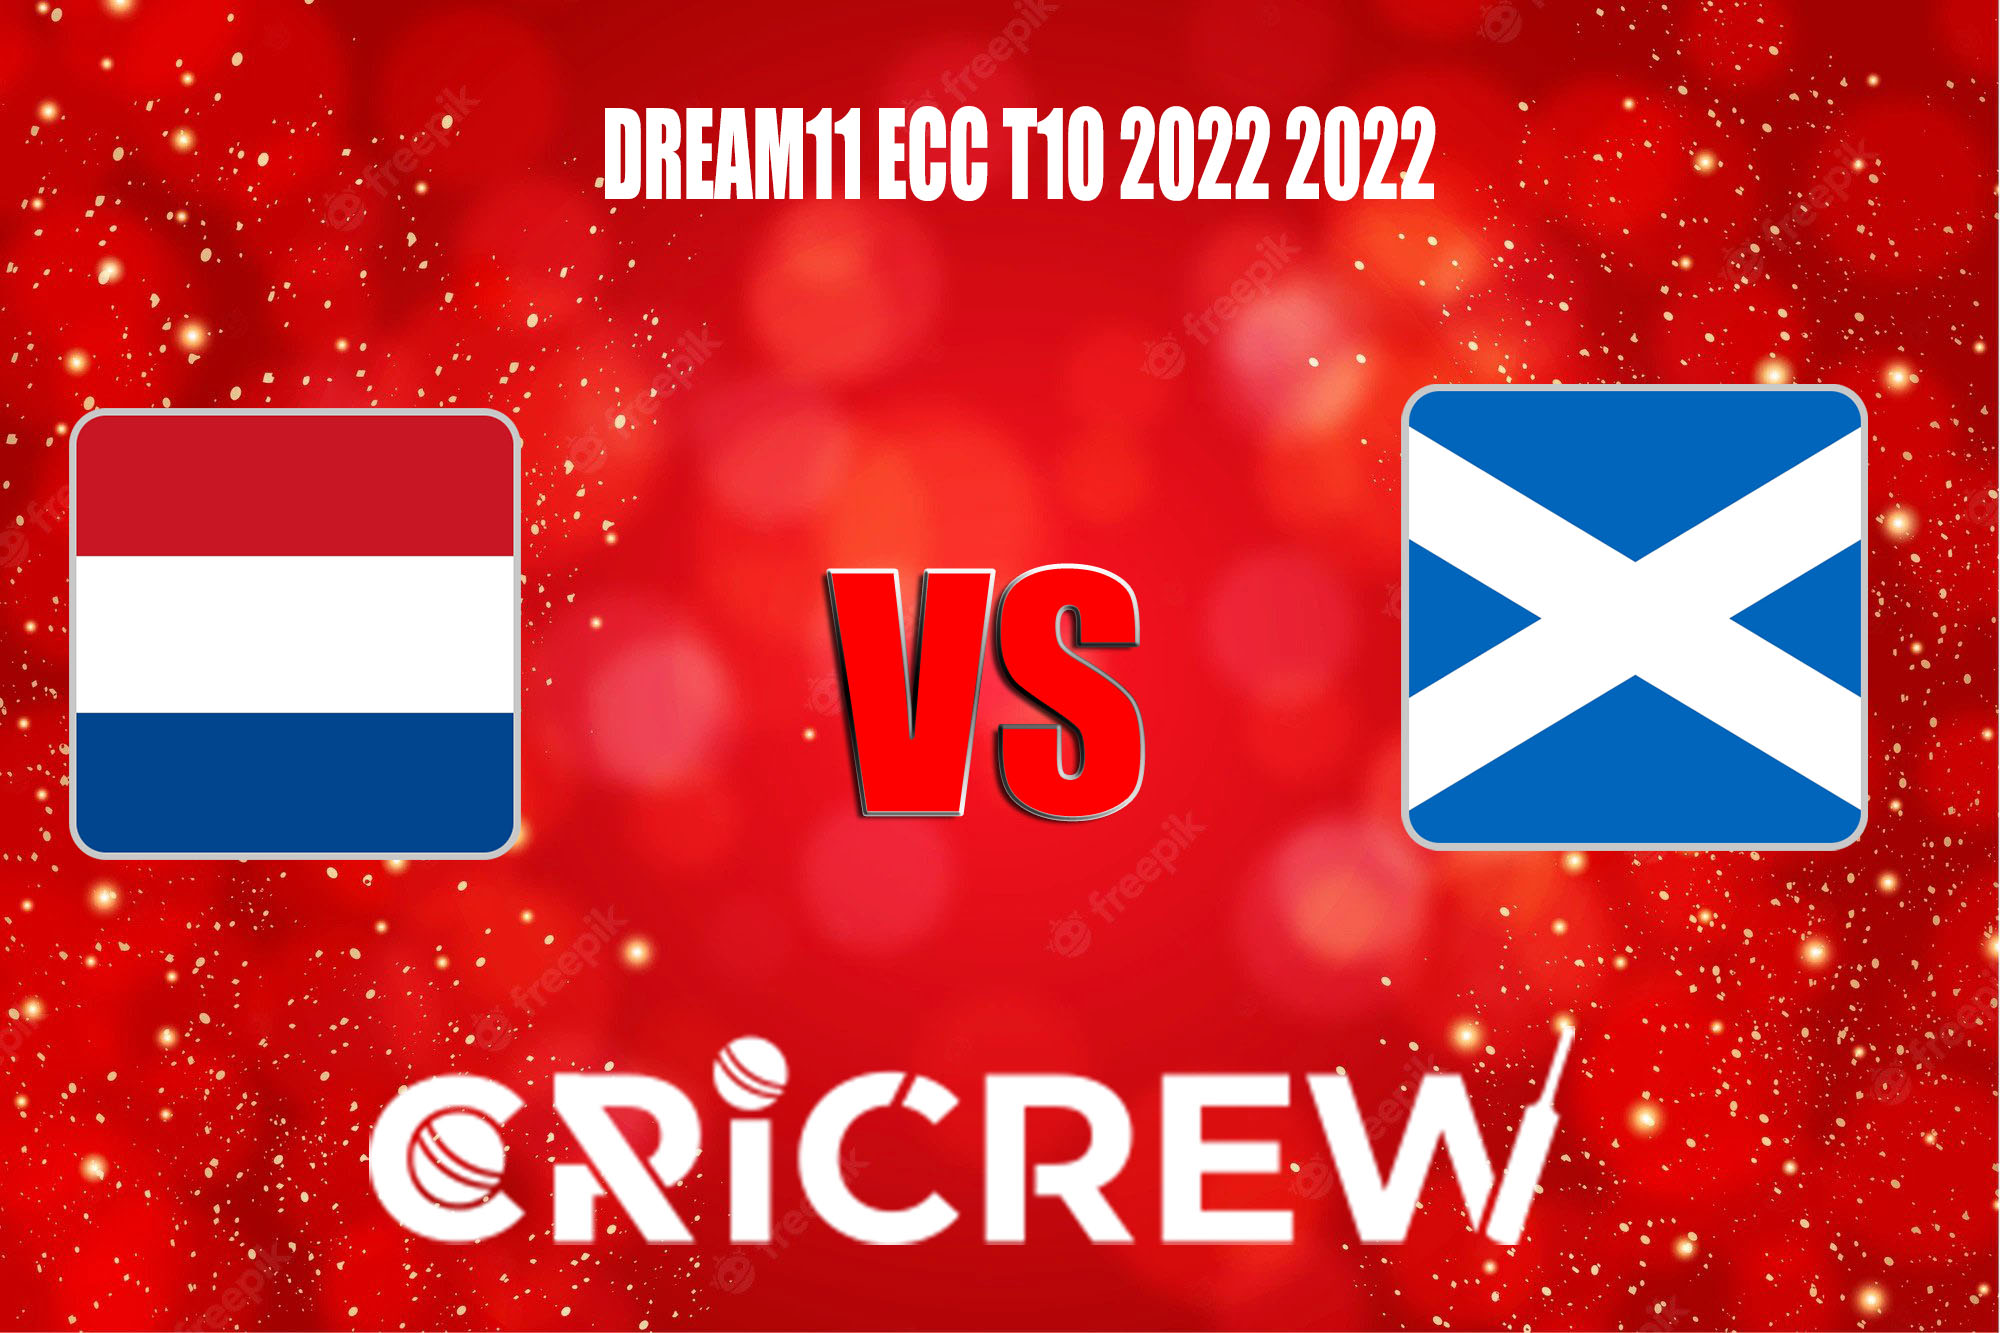 NED-XI vs SCO-XI Live Score starts on 10 Oct 2022, Mon, 5:00 PM IST. Cartama Oval, Spain. Here on www.cricrew.com you can find all Live, Upcoming and Recent Mat